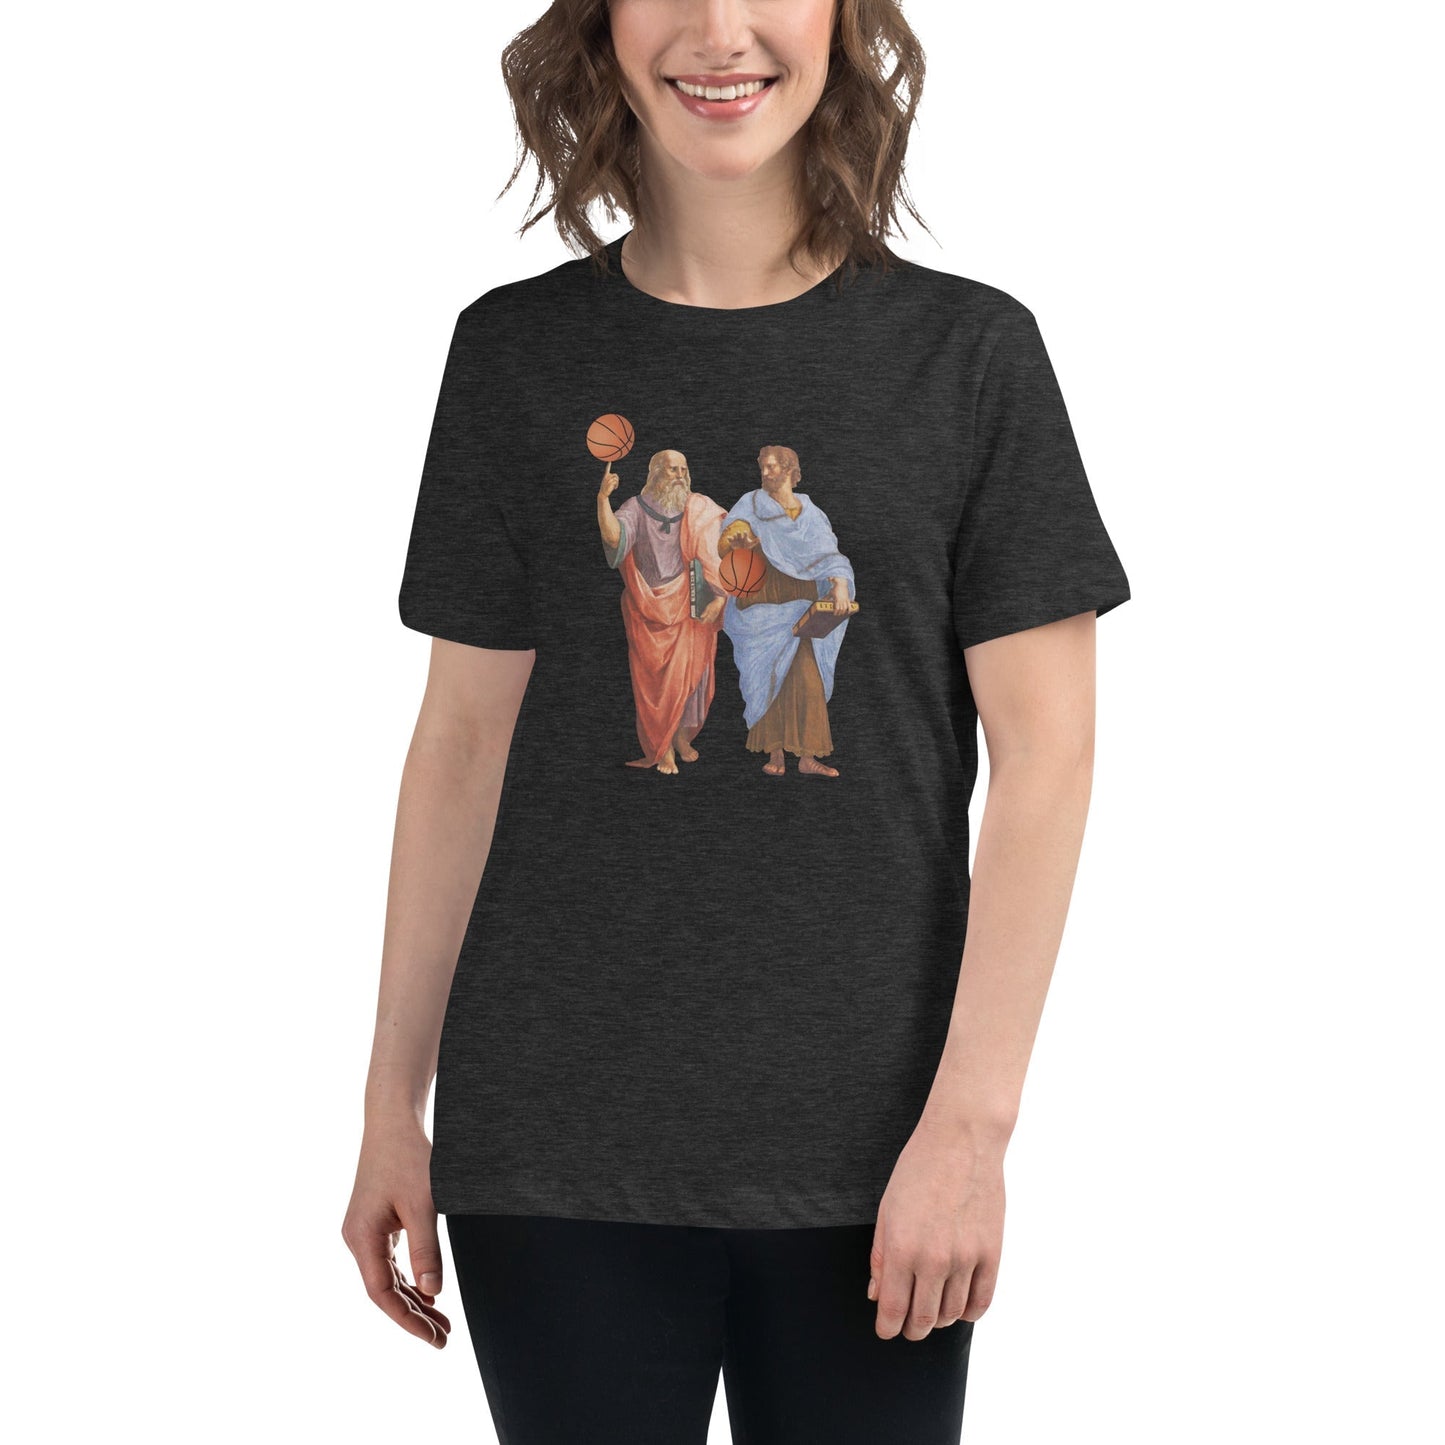 Aristotle and Plato with Basketballs - Women's T-Shirt